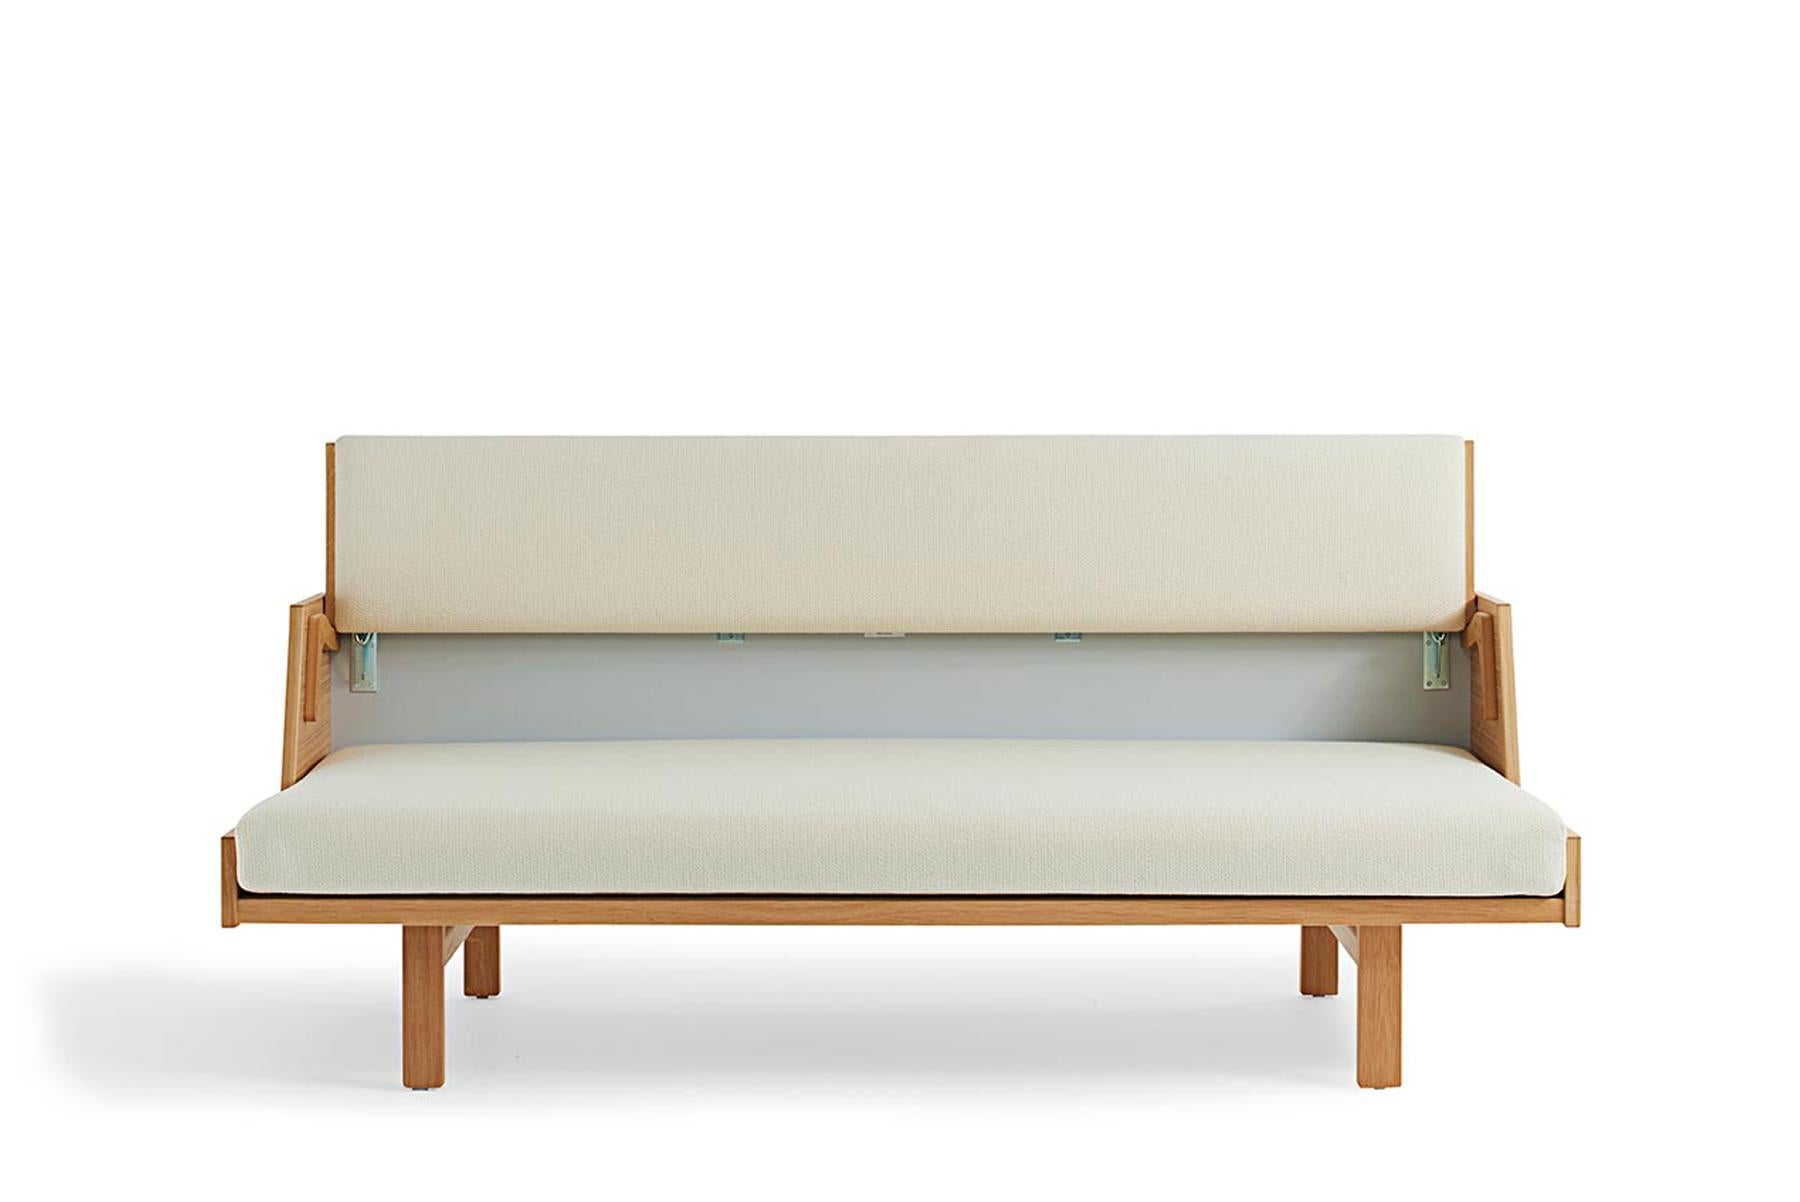 Designed by Hans Wegner in 1954, the GE 258 daybed is a versatile piece of furniture. The upholstered backrest lifts to provide a roomy bed. Crafted in solid wood, this bench is hand built at GETAMA’s factory in Gedsted, Denmark by skilled